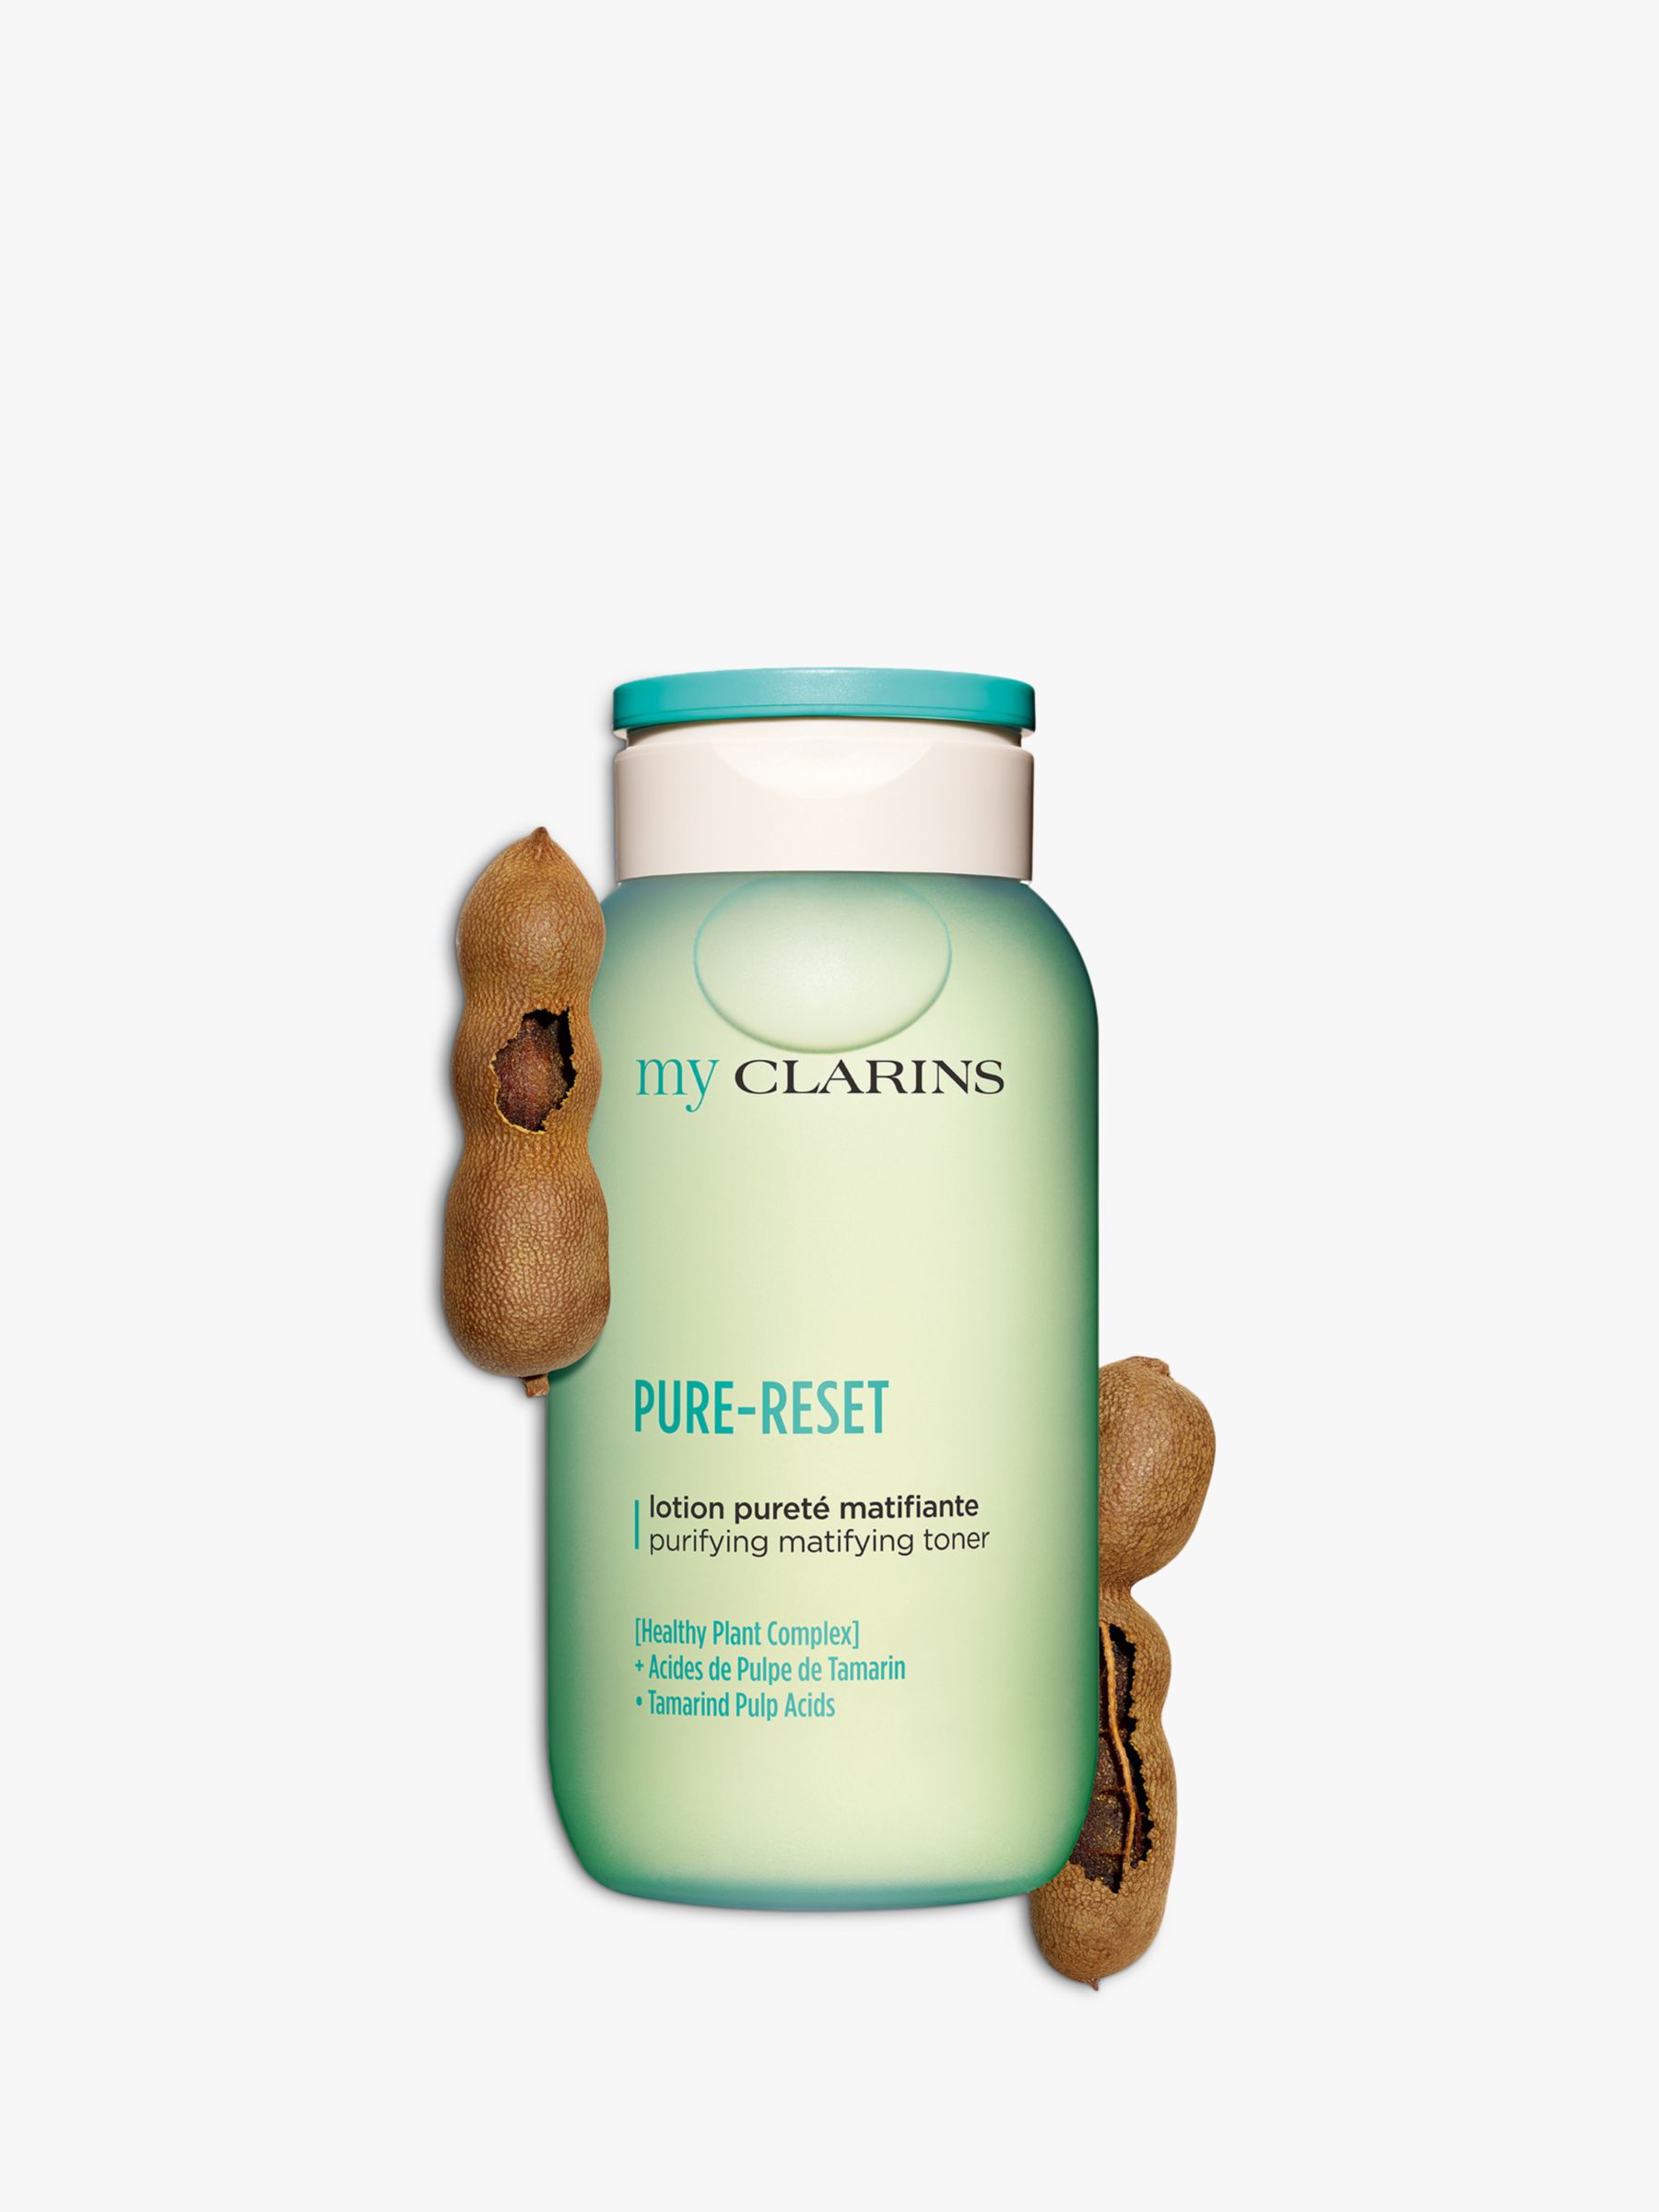 Clarins My Clarins PURE-RESET Purifying Matifying Toner, 200ml 2